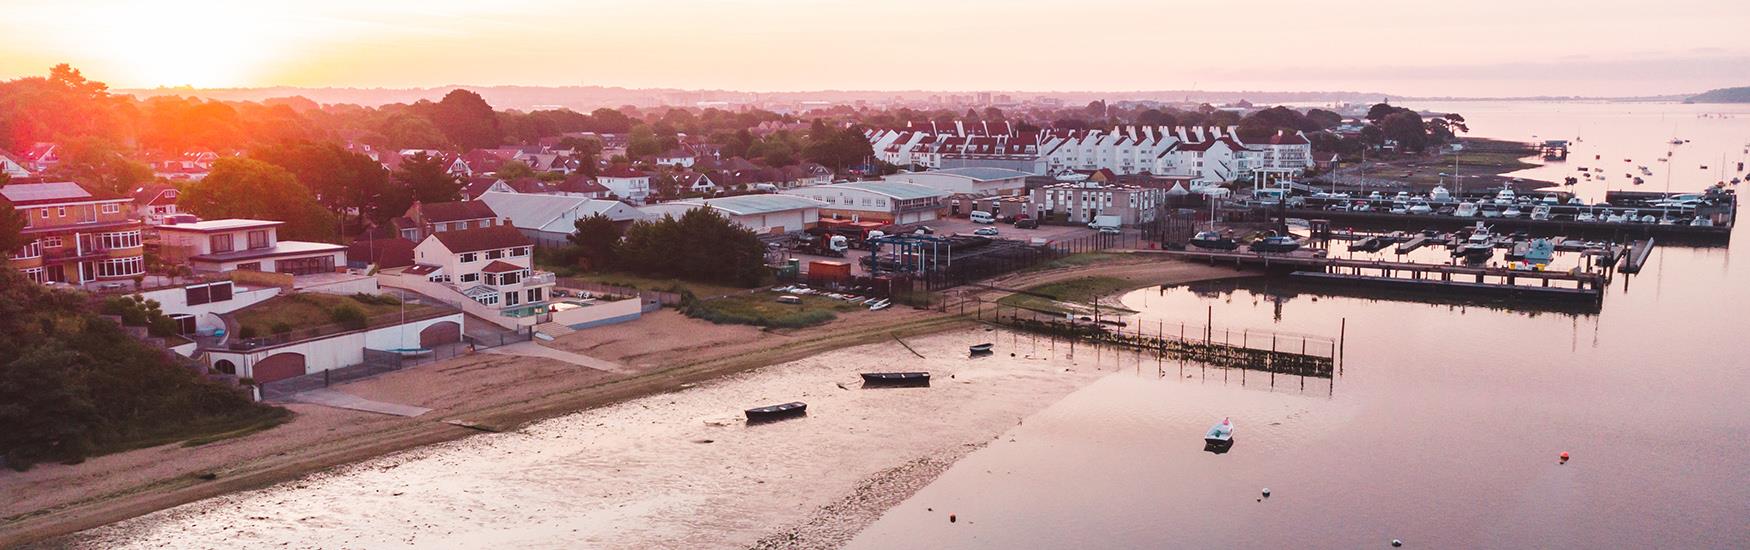 Sunset over Poole harbour and bay with hotels and accommodation by the sea